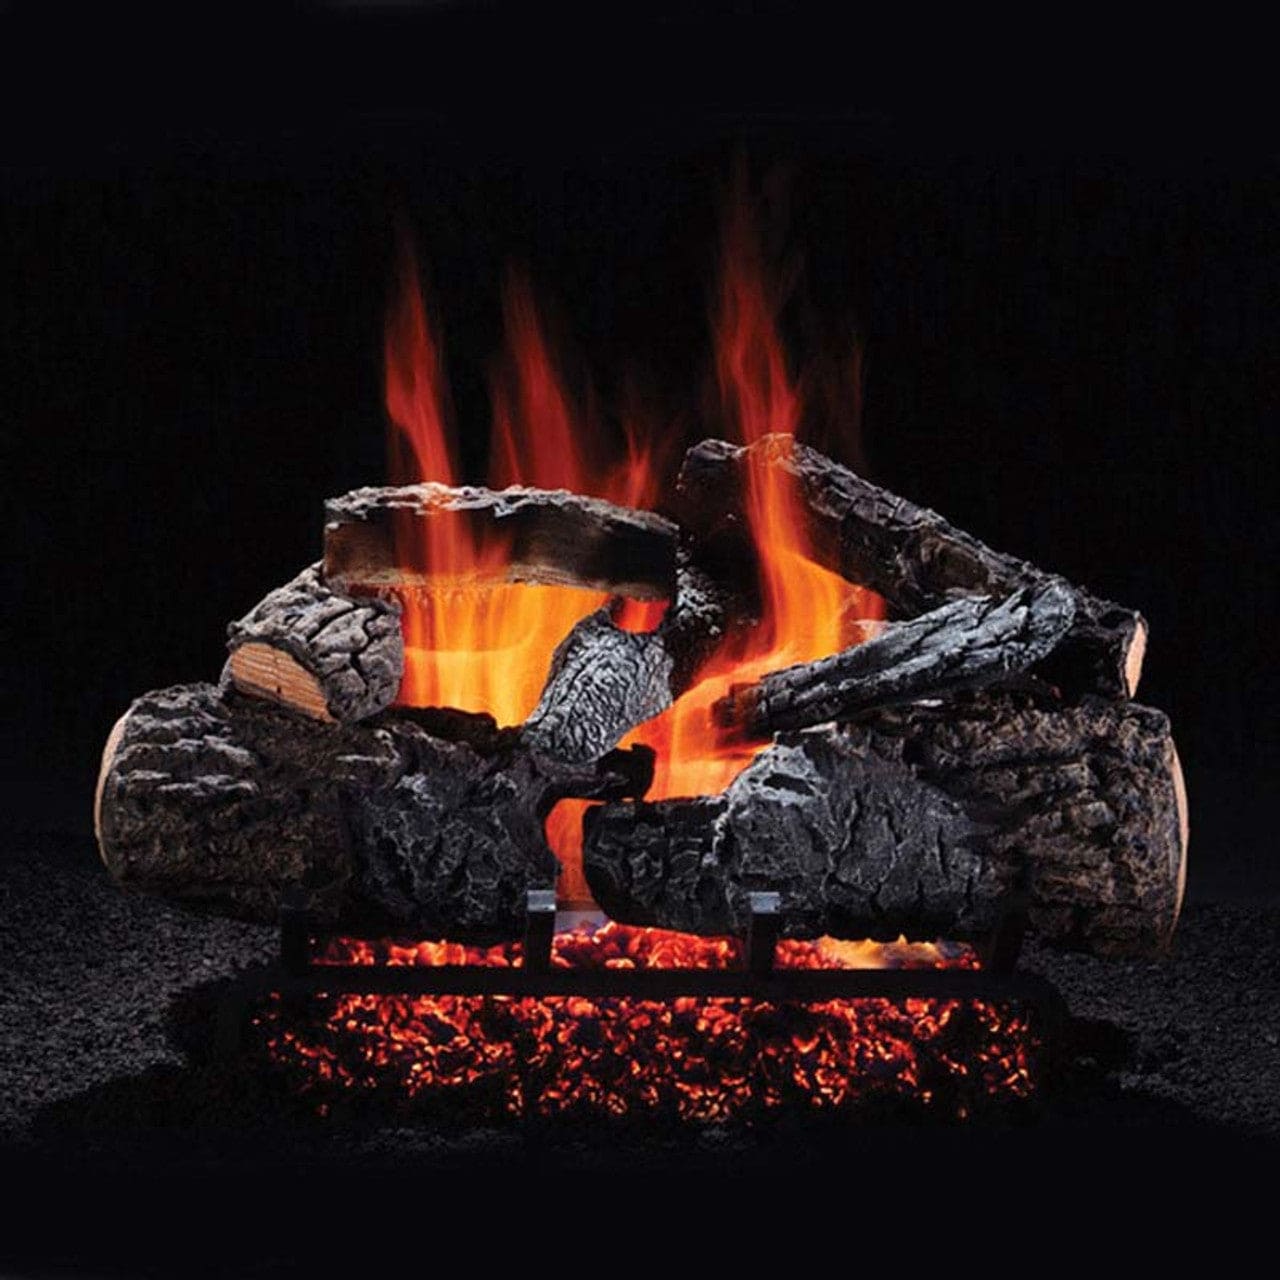 24" Hargrove RGA 2-72 Approved Cross Timbers Vented Gas Logs - CTS2409RG - Chimney Cricket